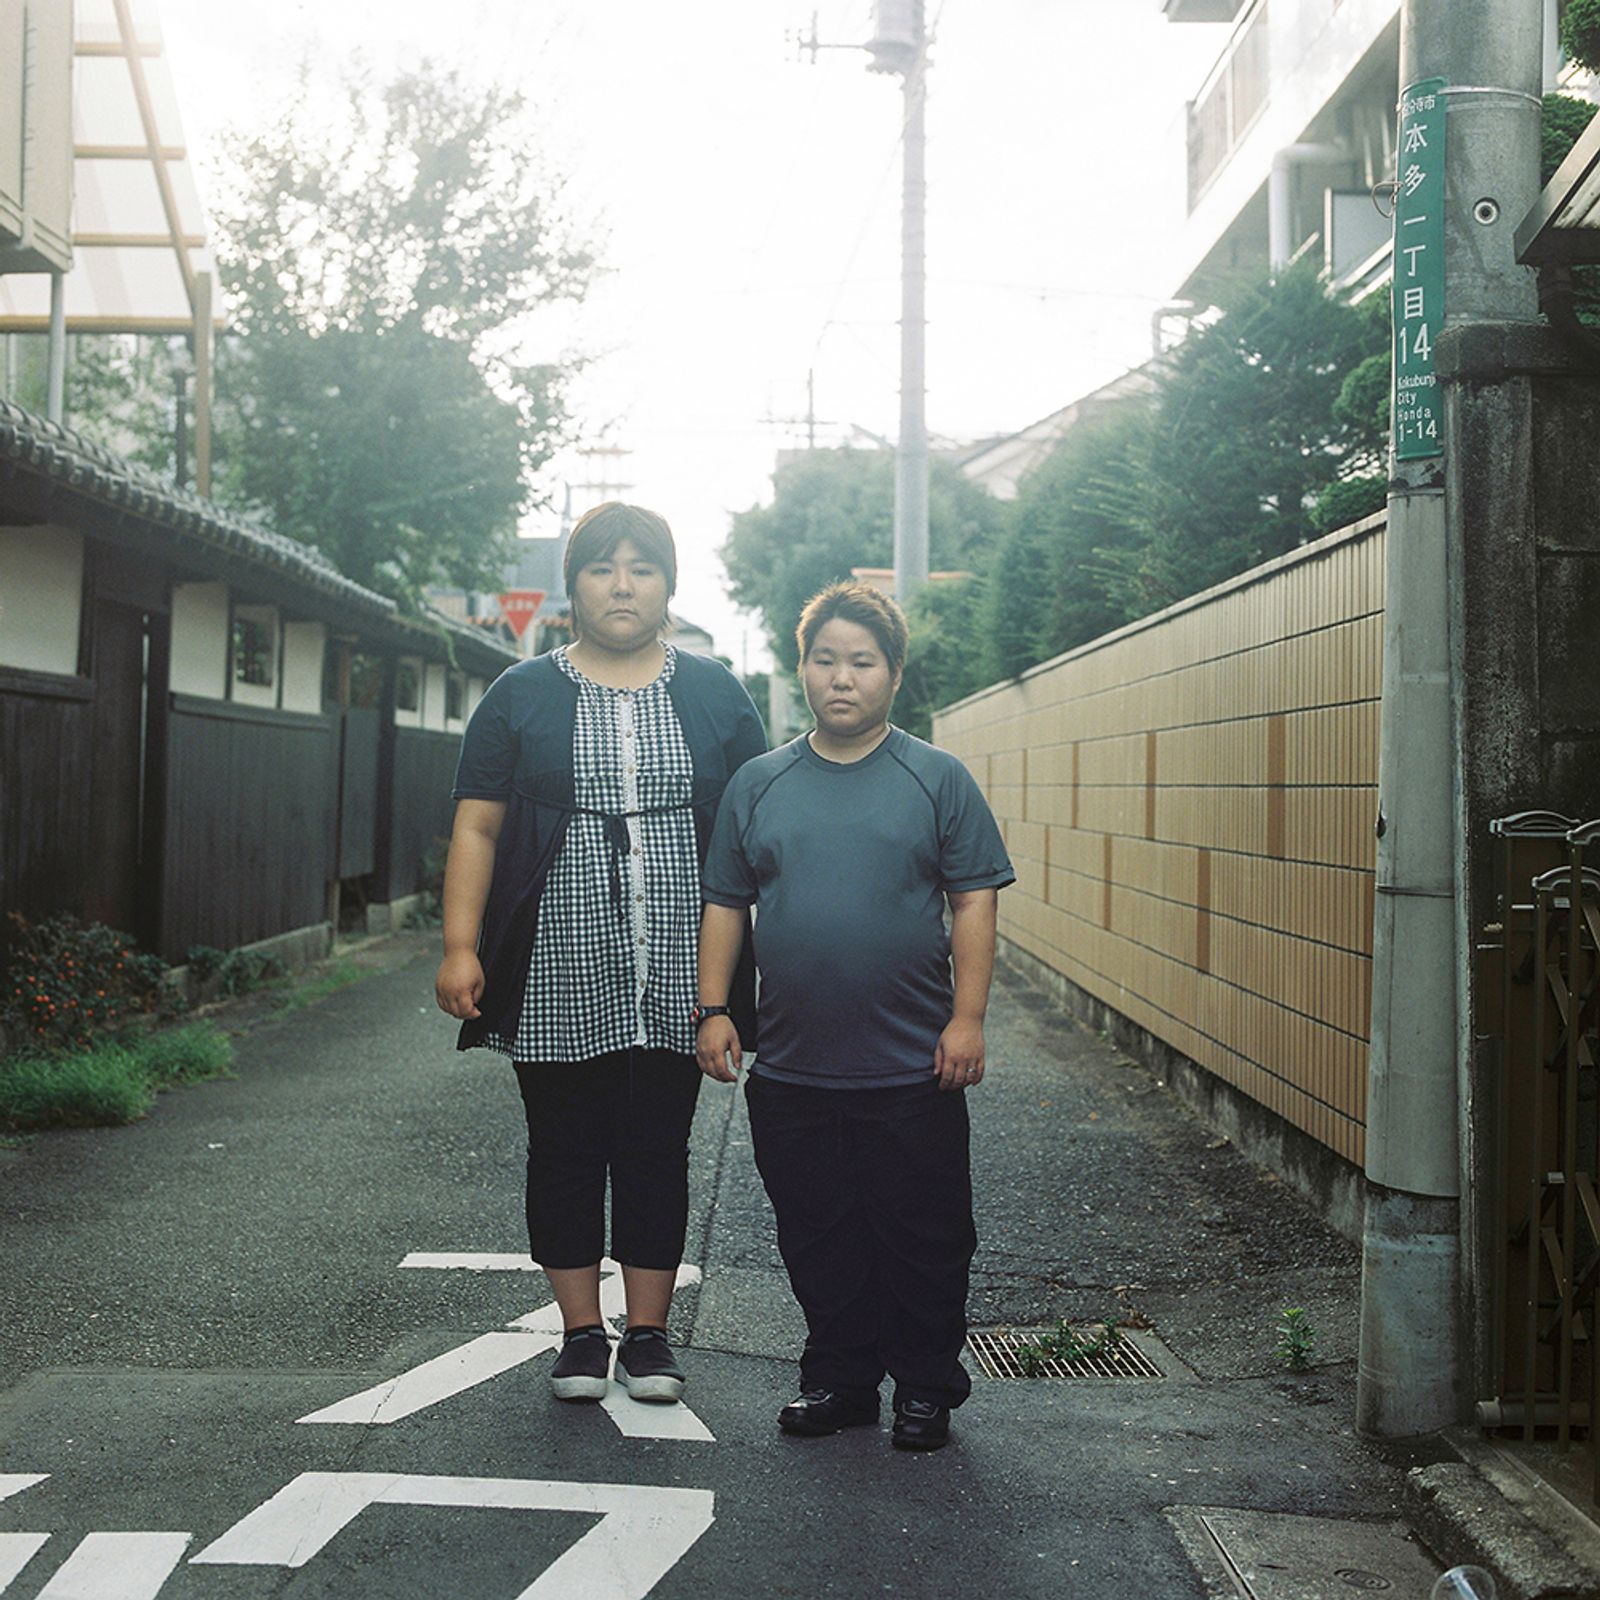 © Miki Hasegawa - Image from the internal notebook photography project